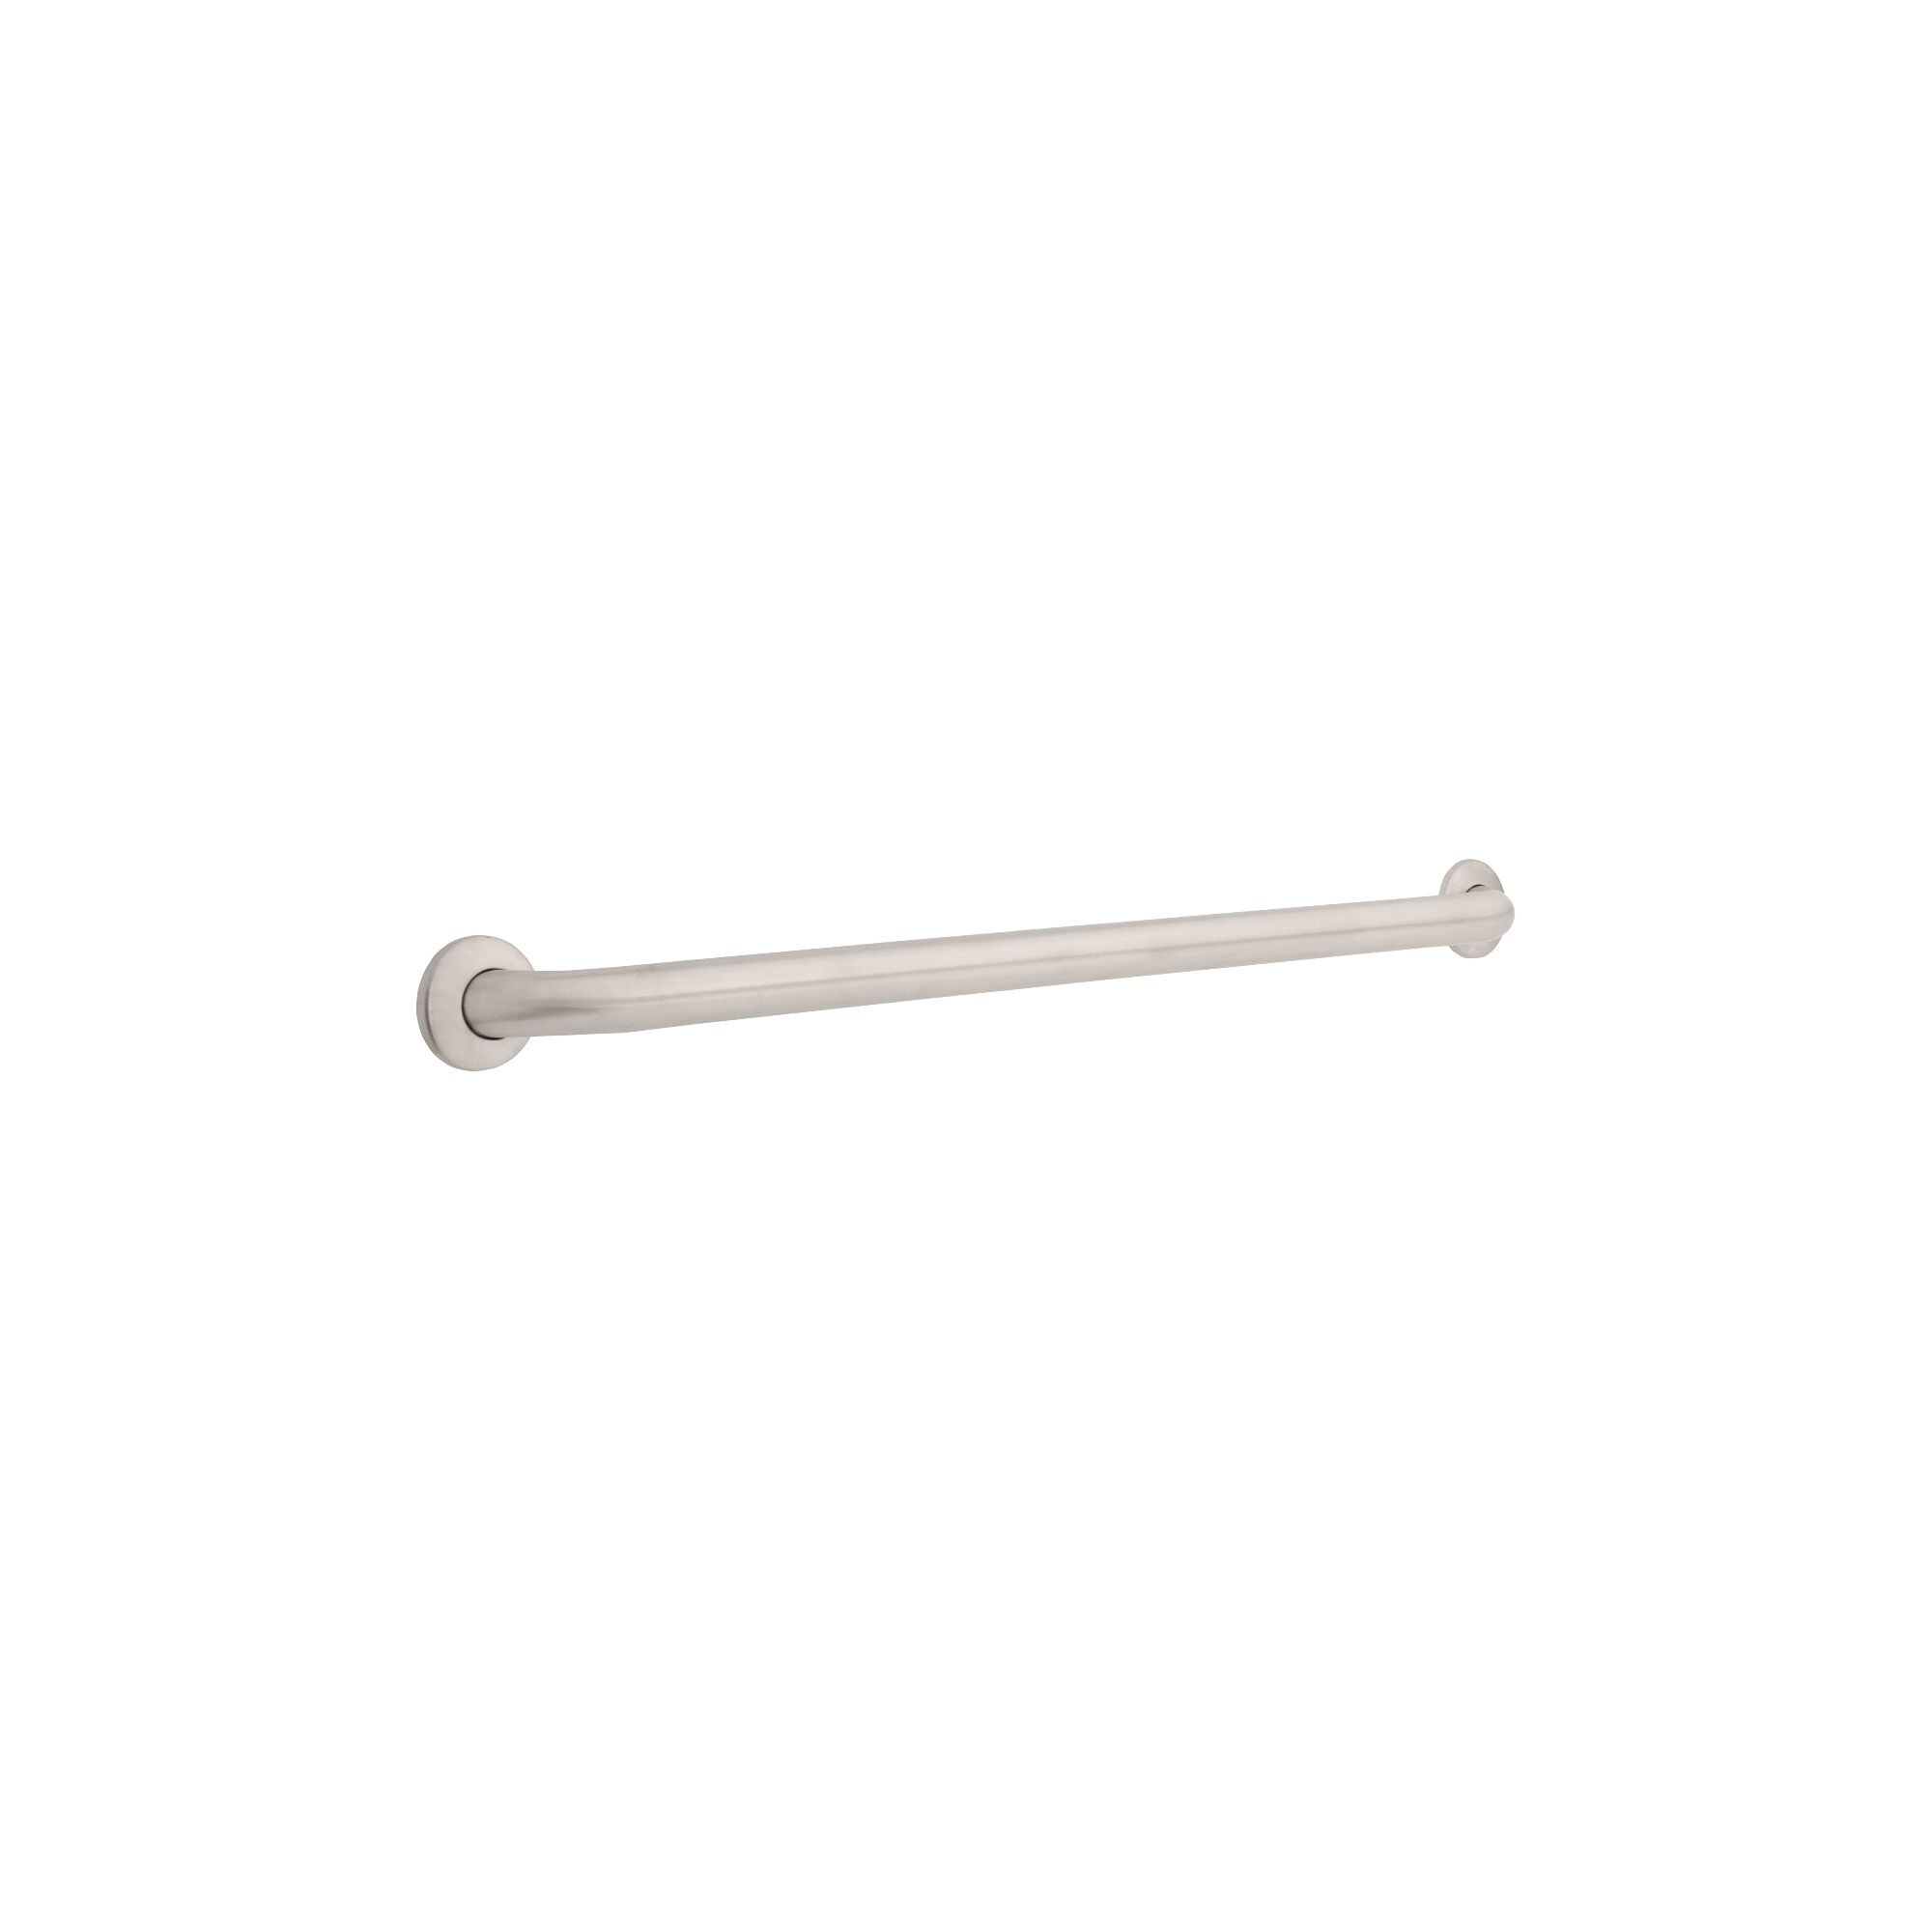 Delta Commercial 1-1/2" x 36" ADA Grab Bar, Concealed Mounting Stainless